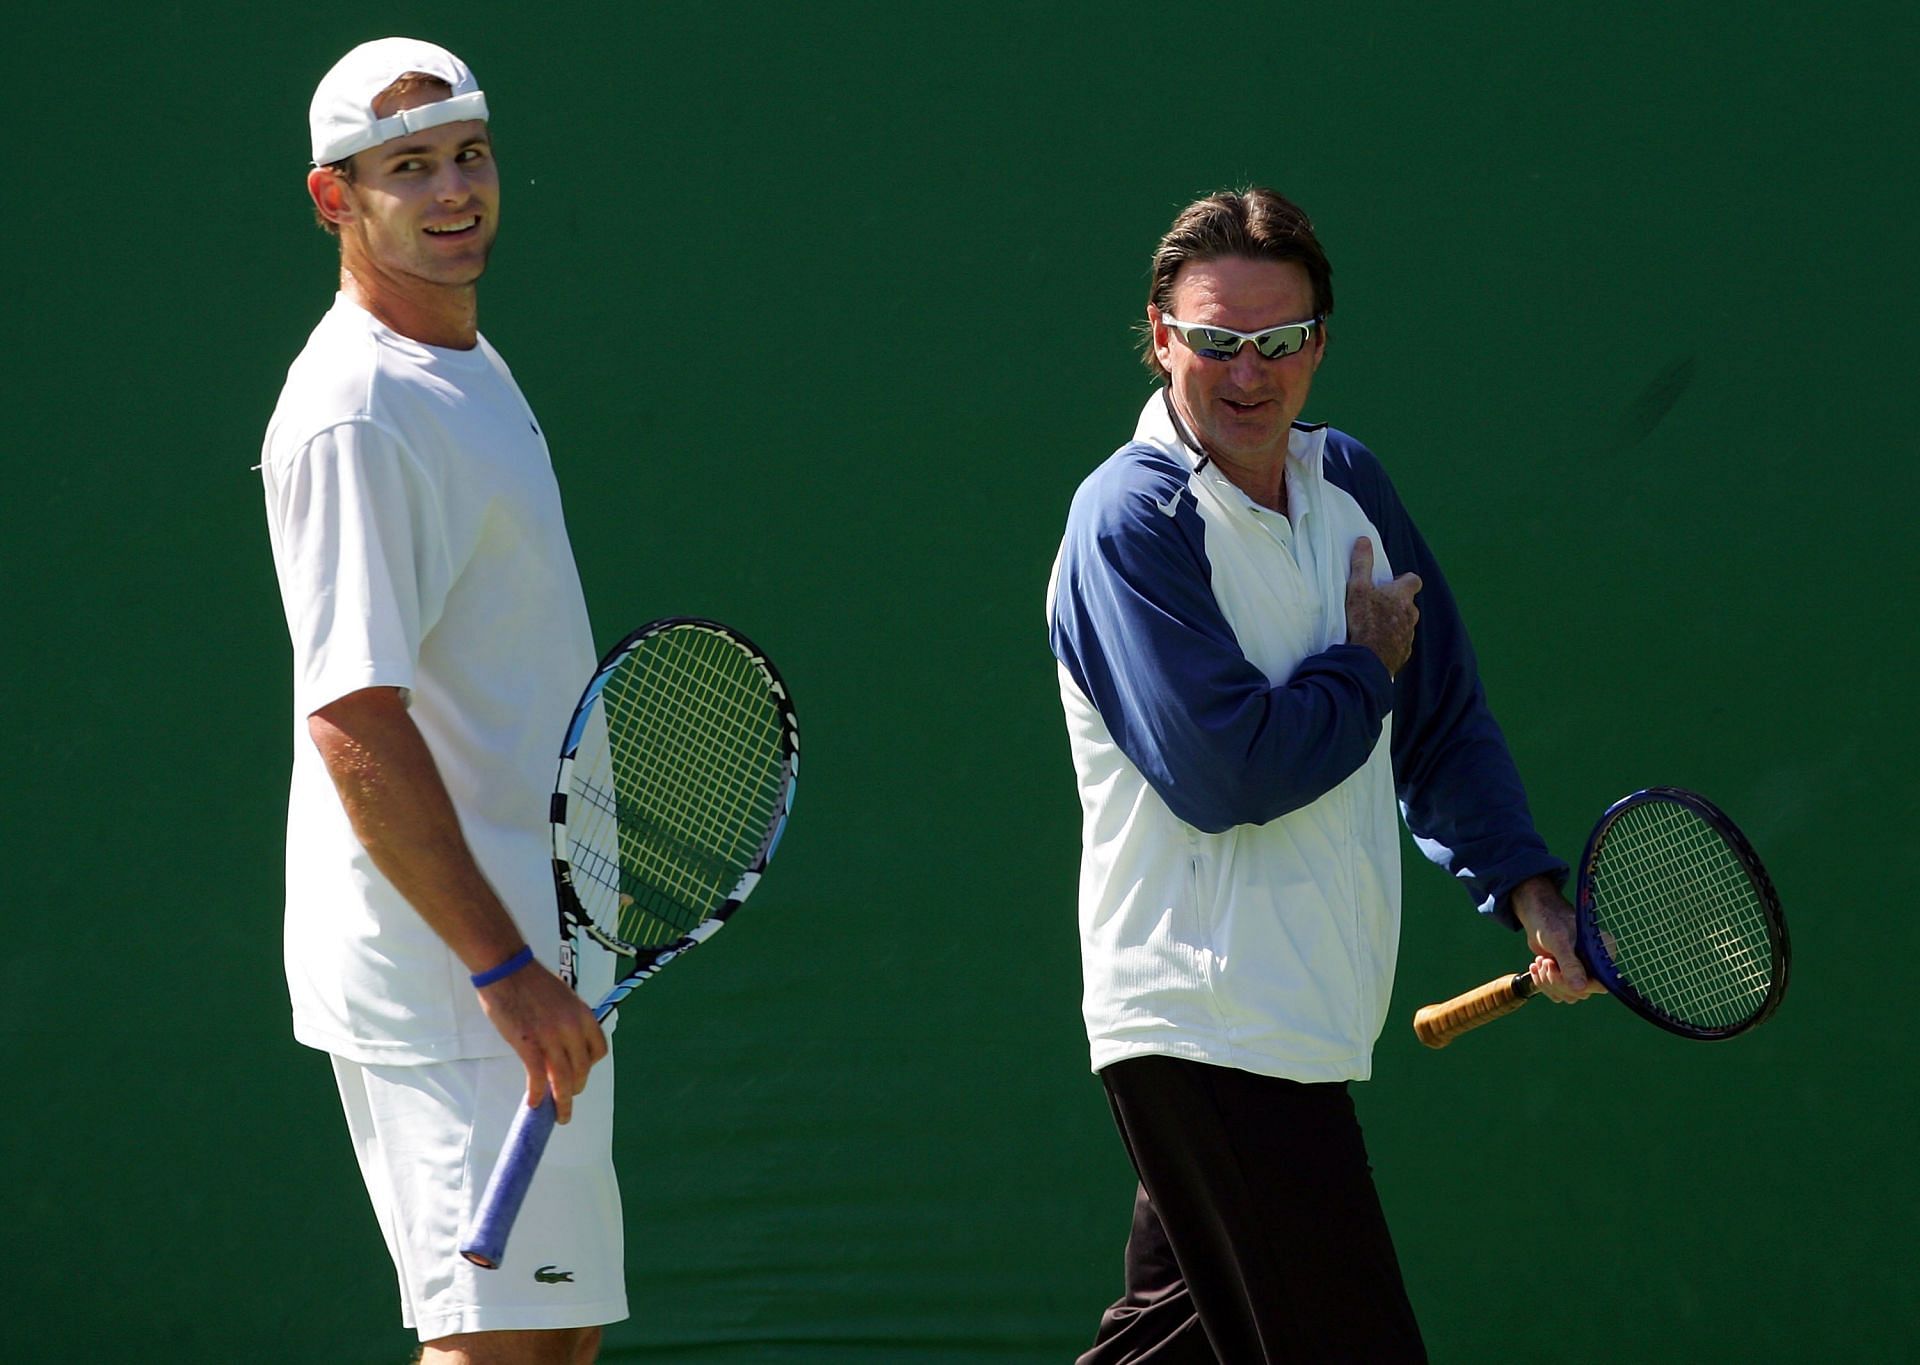 Andy Roddick and Jimmy Connors at the 2007 Australian Open - Day 10.